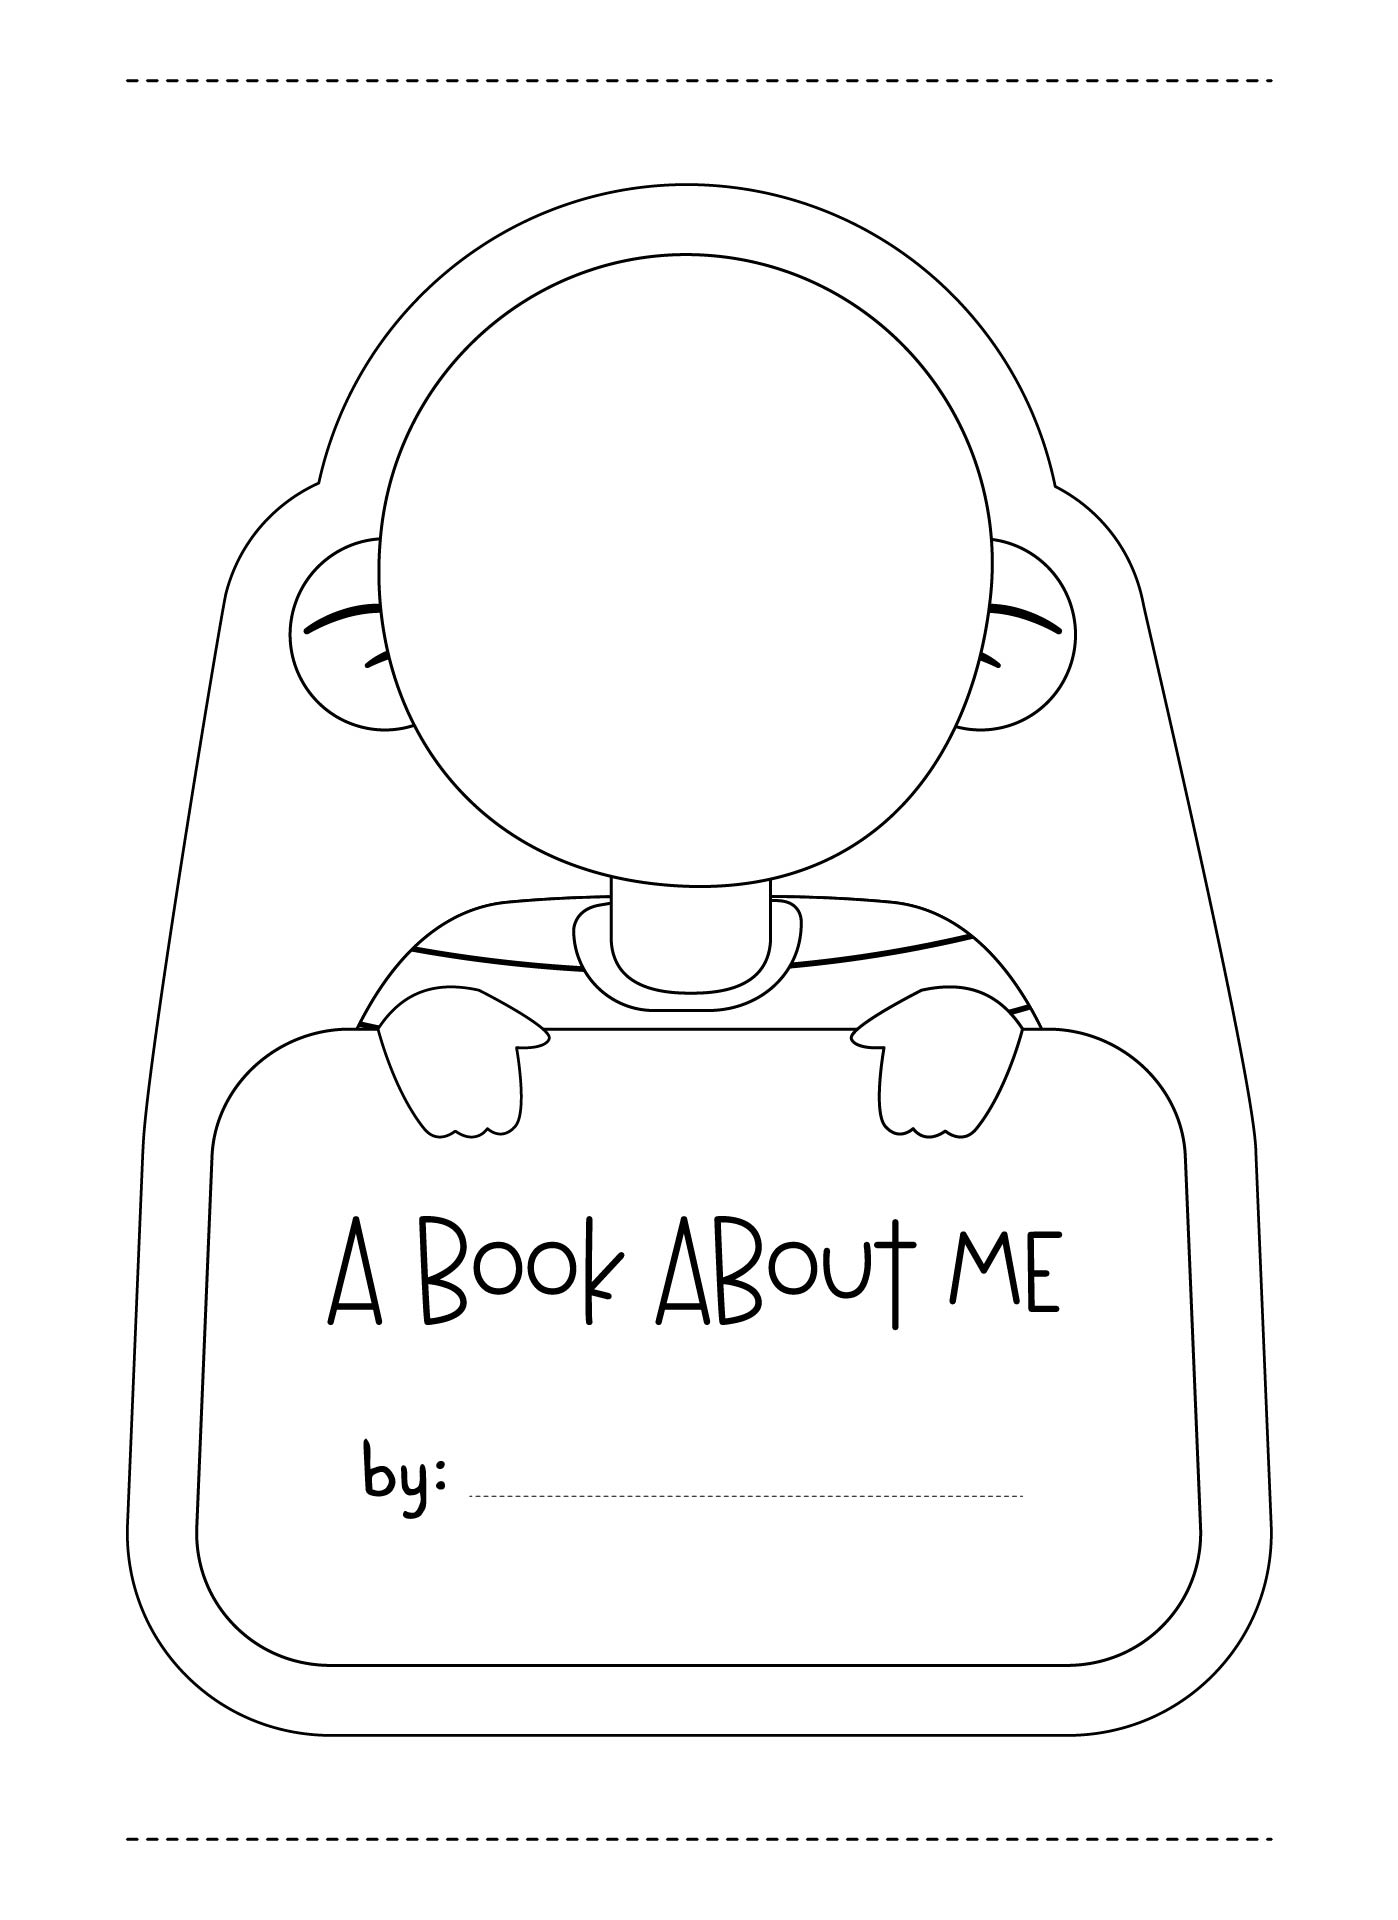 4-best-images-of-a-book-about-me-printable-all-about-me-printable-book-all-about-me-printable